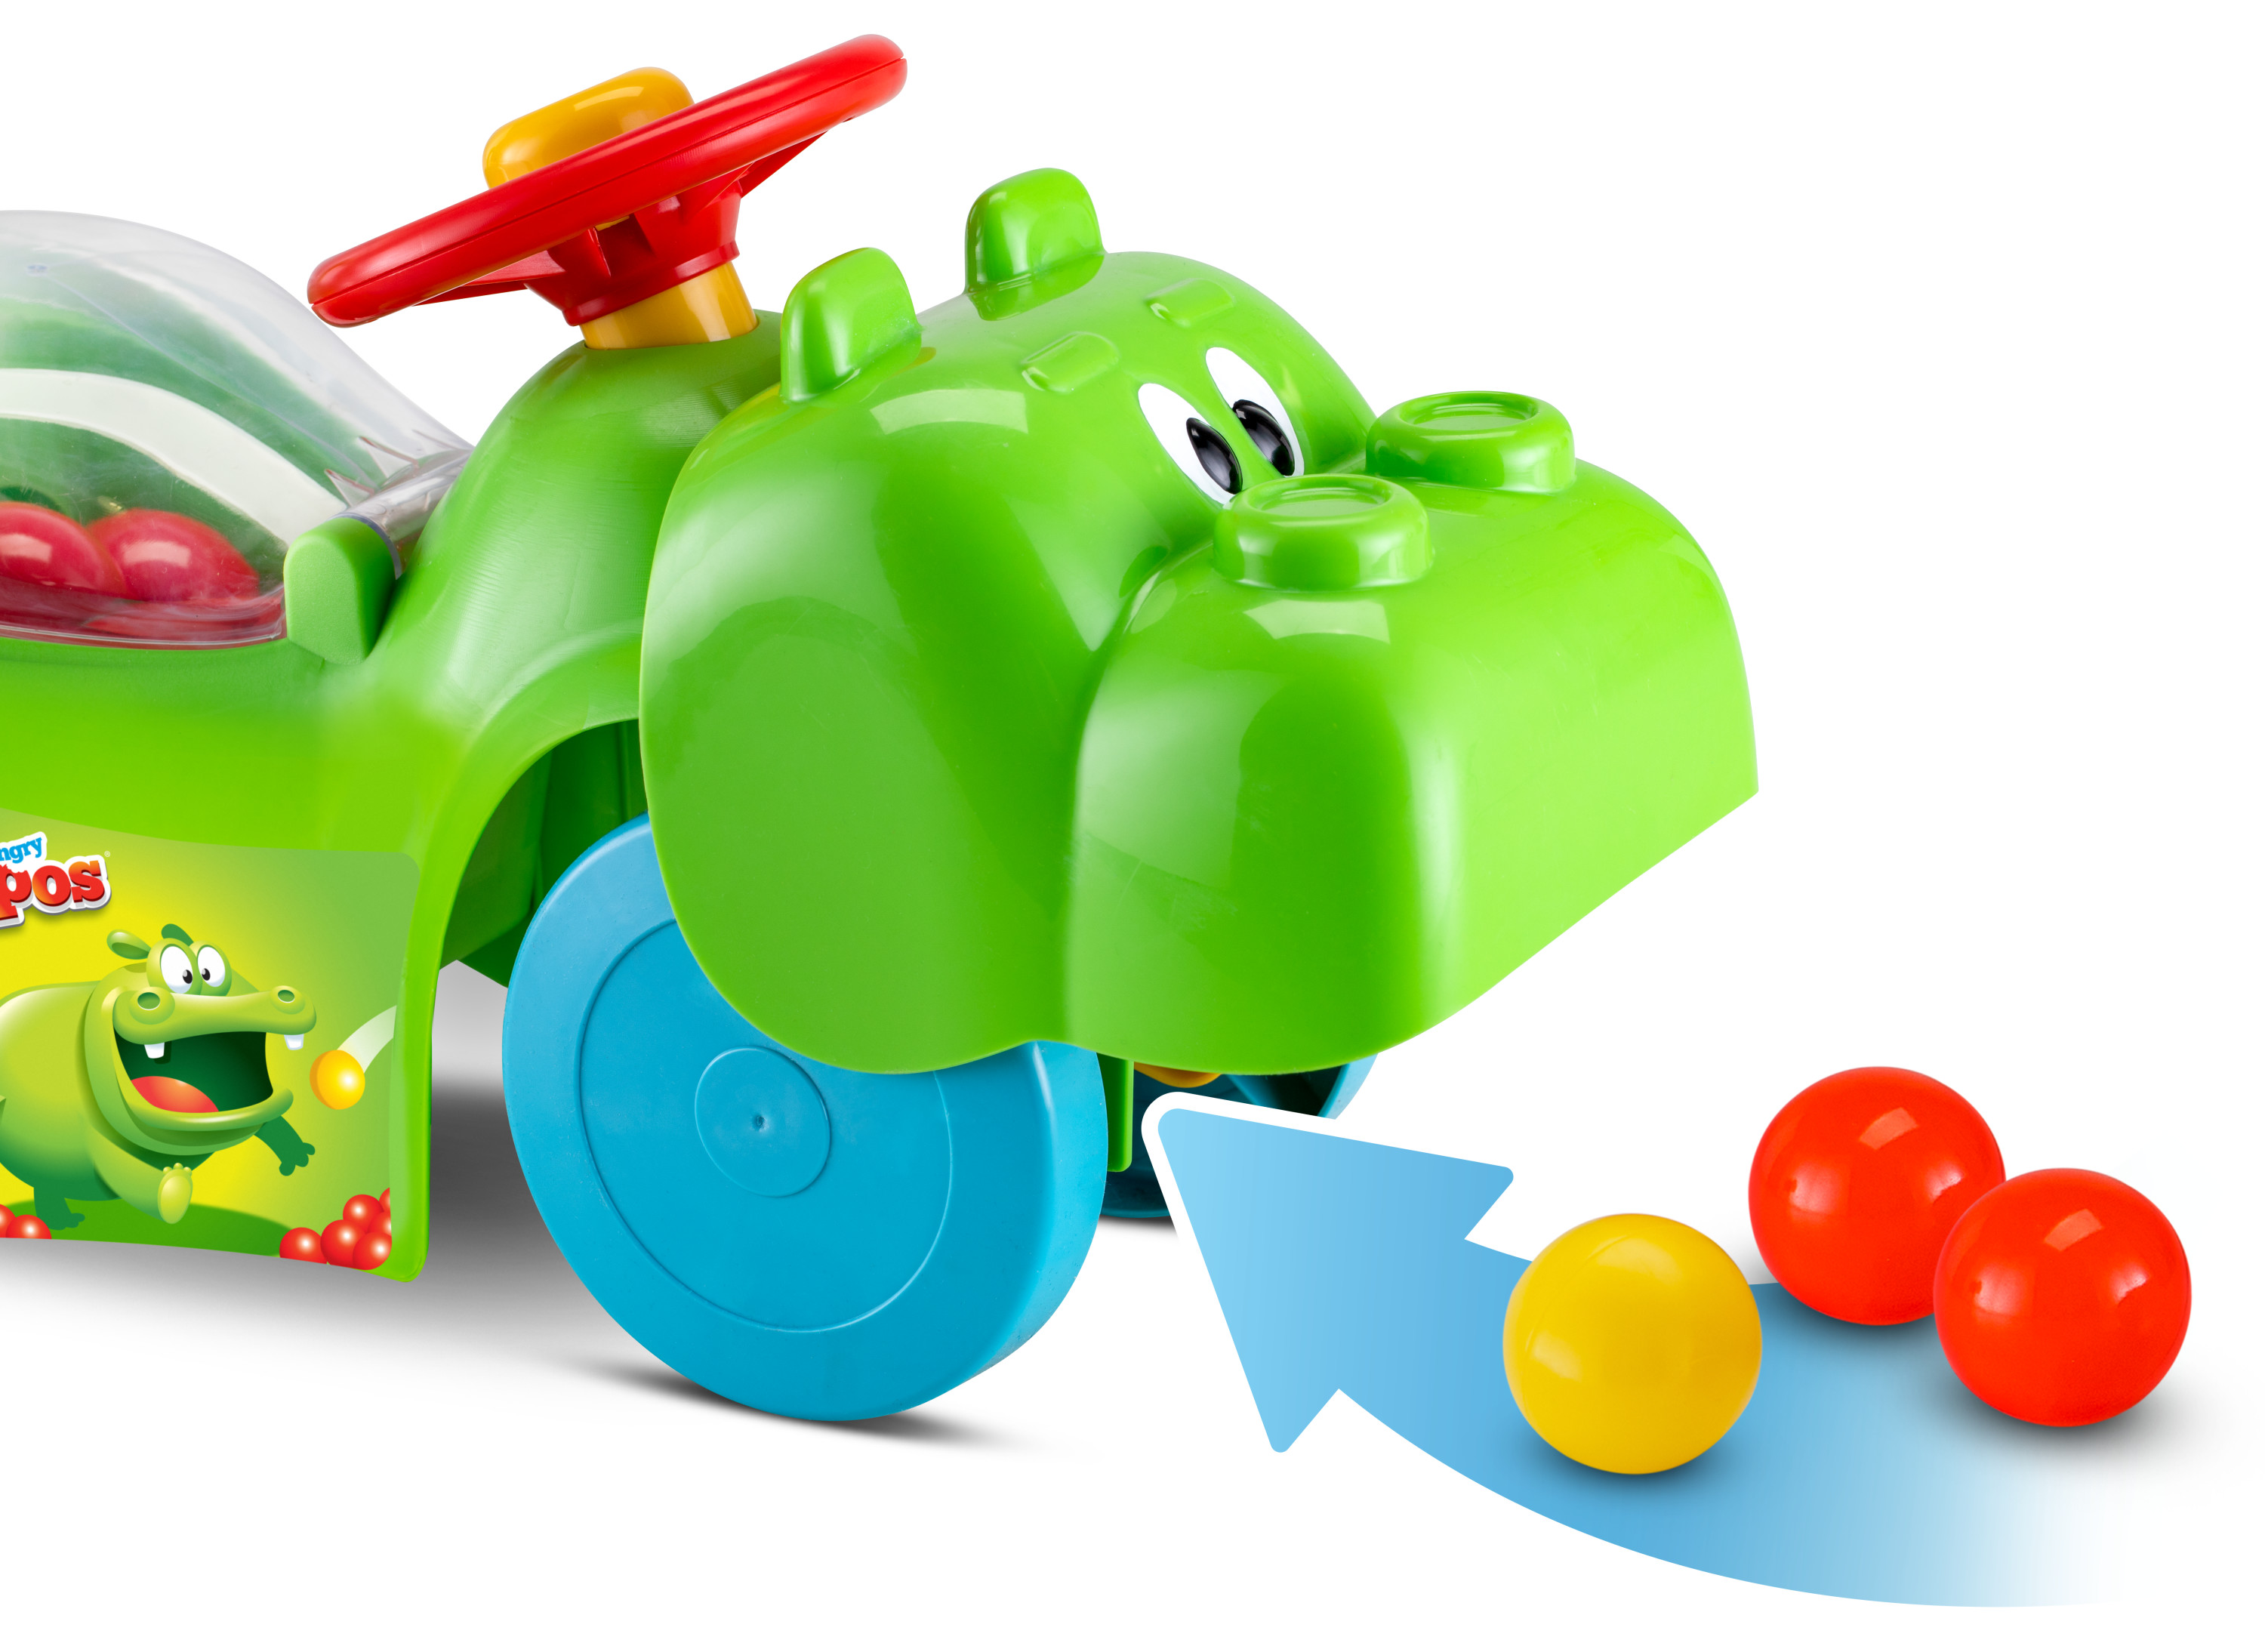 Hasbro Hungry Hungry Hippos 3 in 1 Scoot and Ride On Toy by Kid Trax, Toddler - image 5 of 10